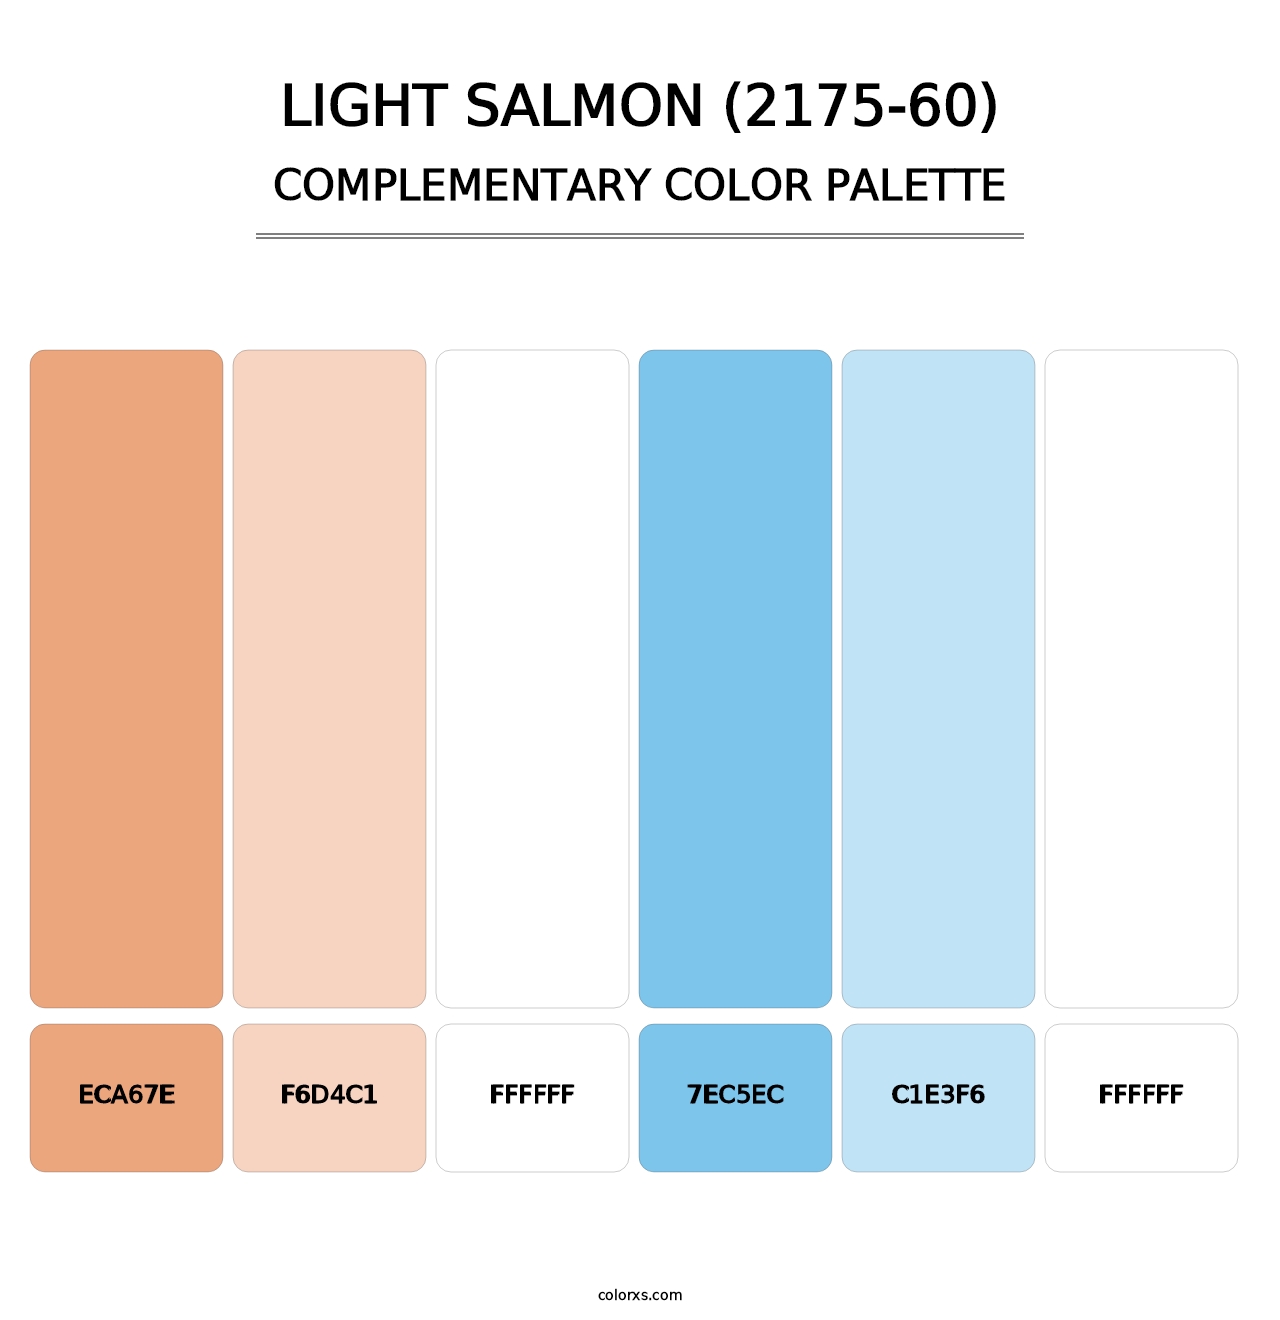 Light Salmon (2175-60) - Complementary Color Palette